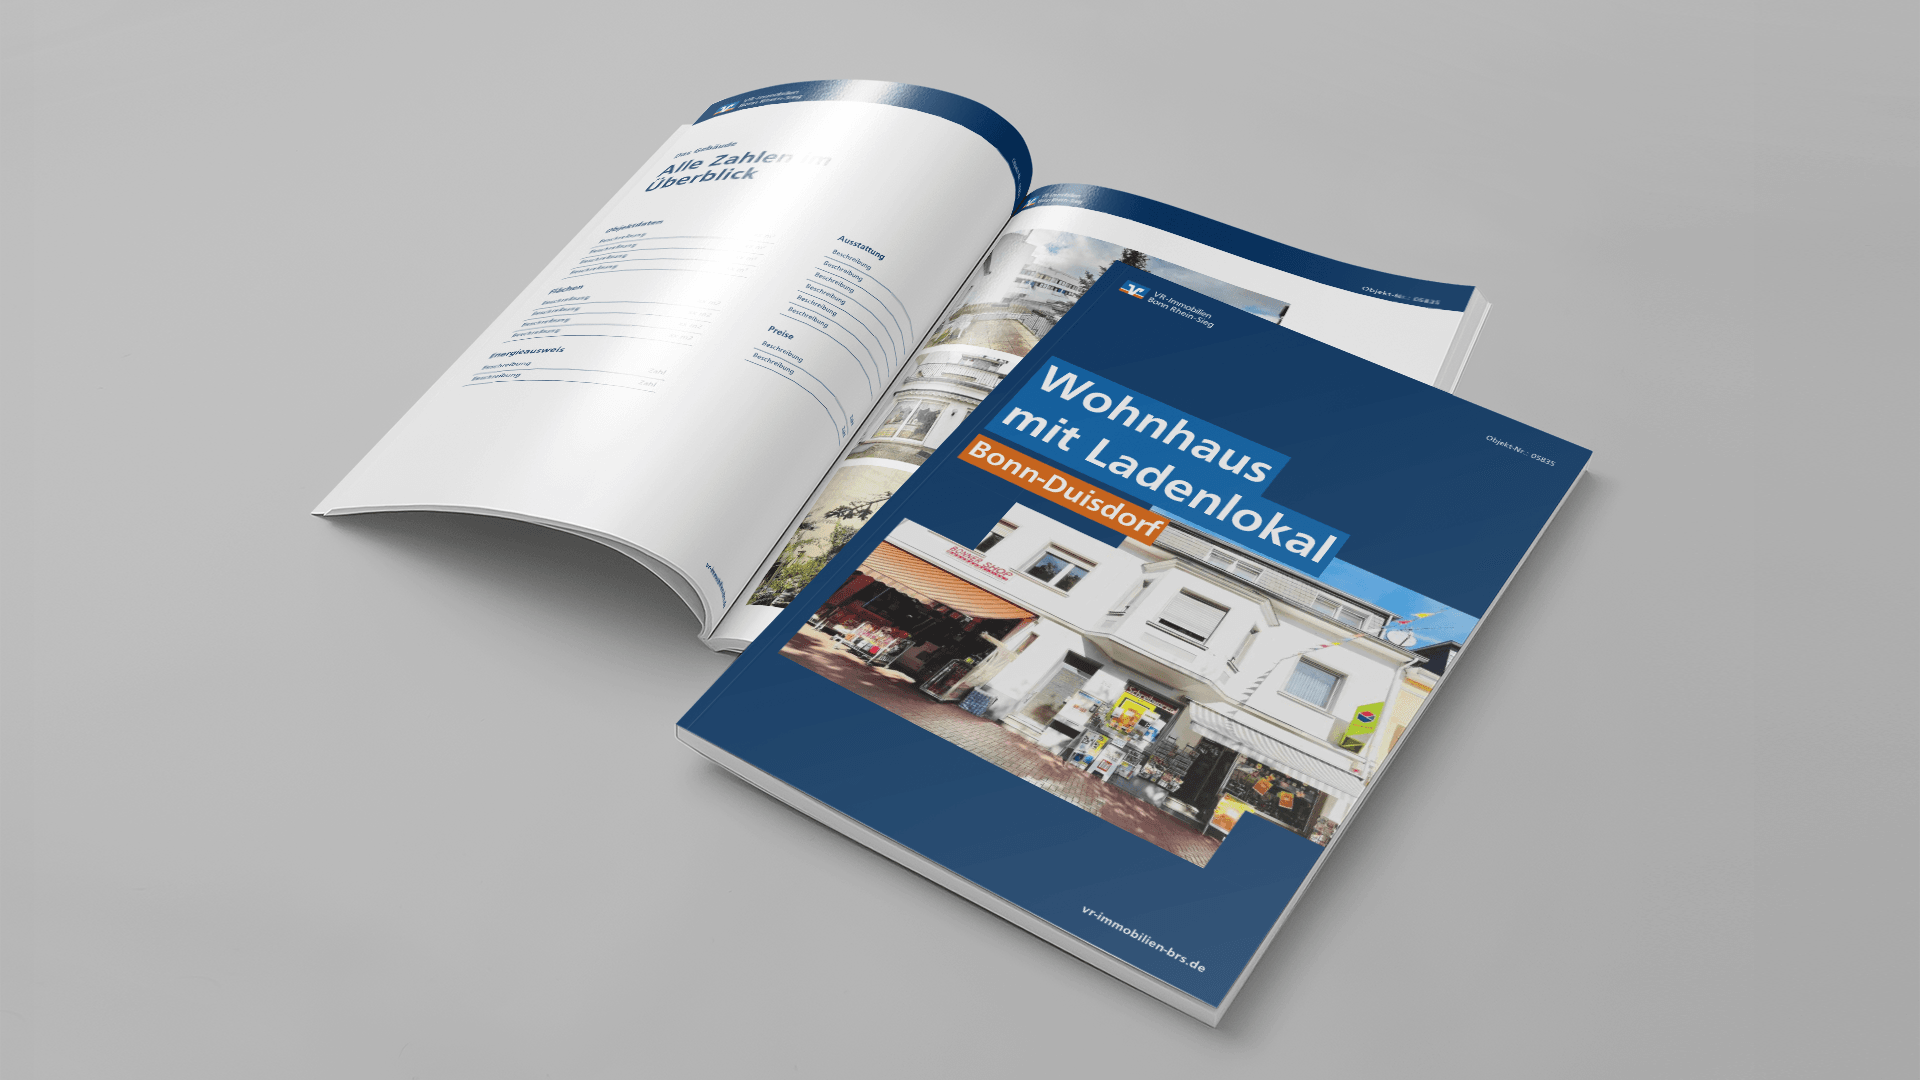 KP_Referenz_VR-Immobilien_Print_Exposé_cover+innen.png
				